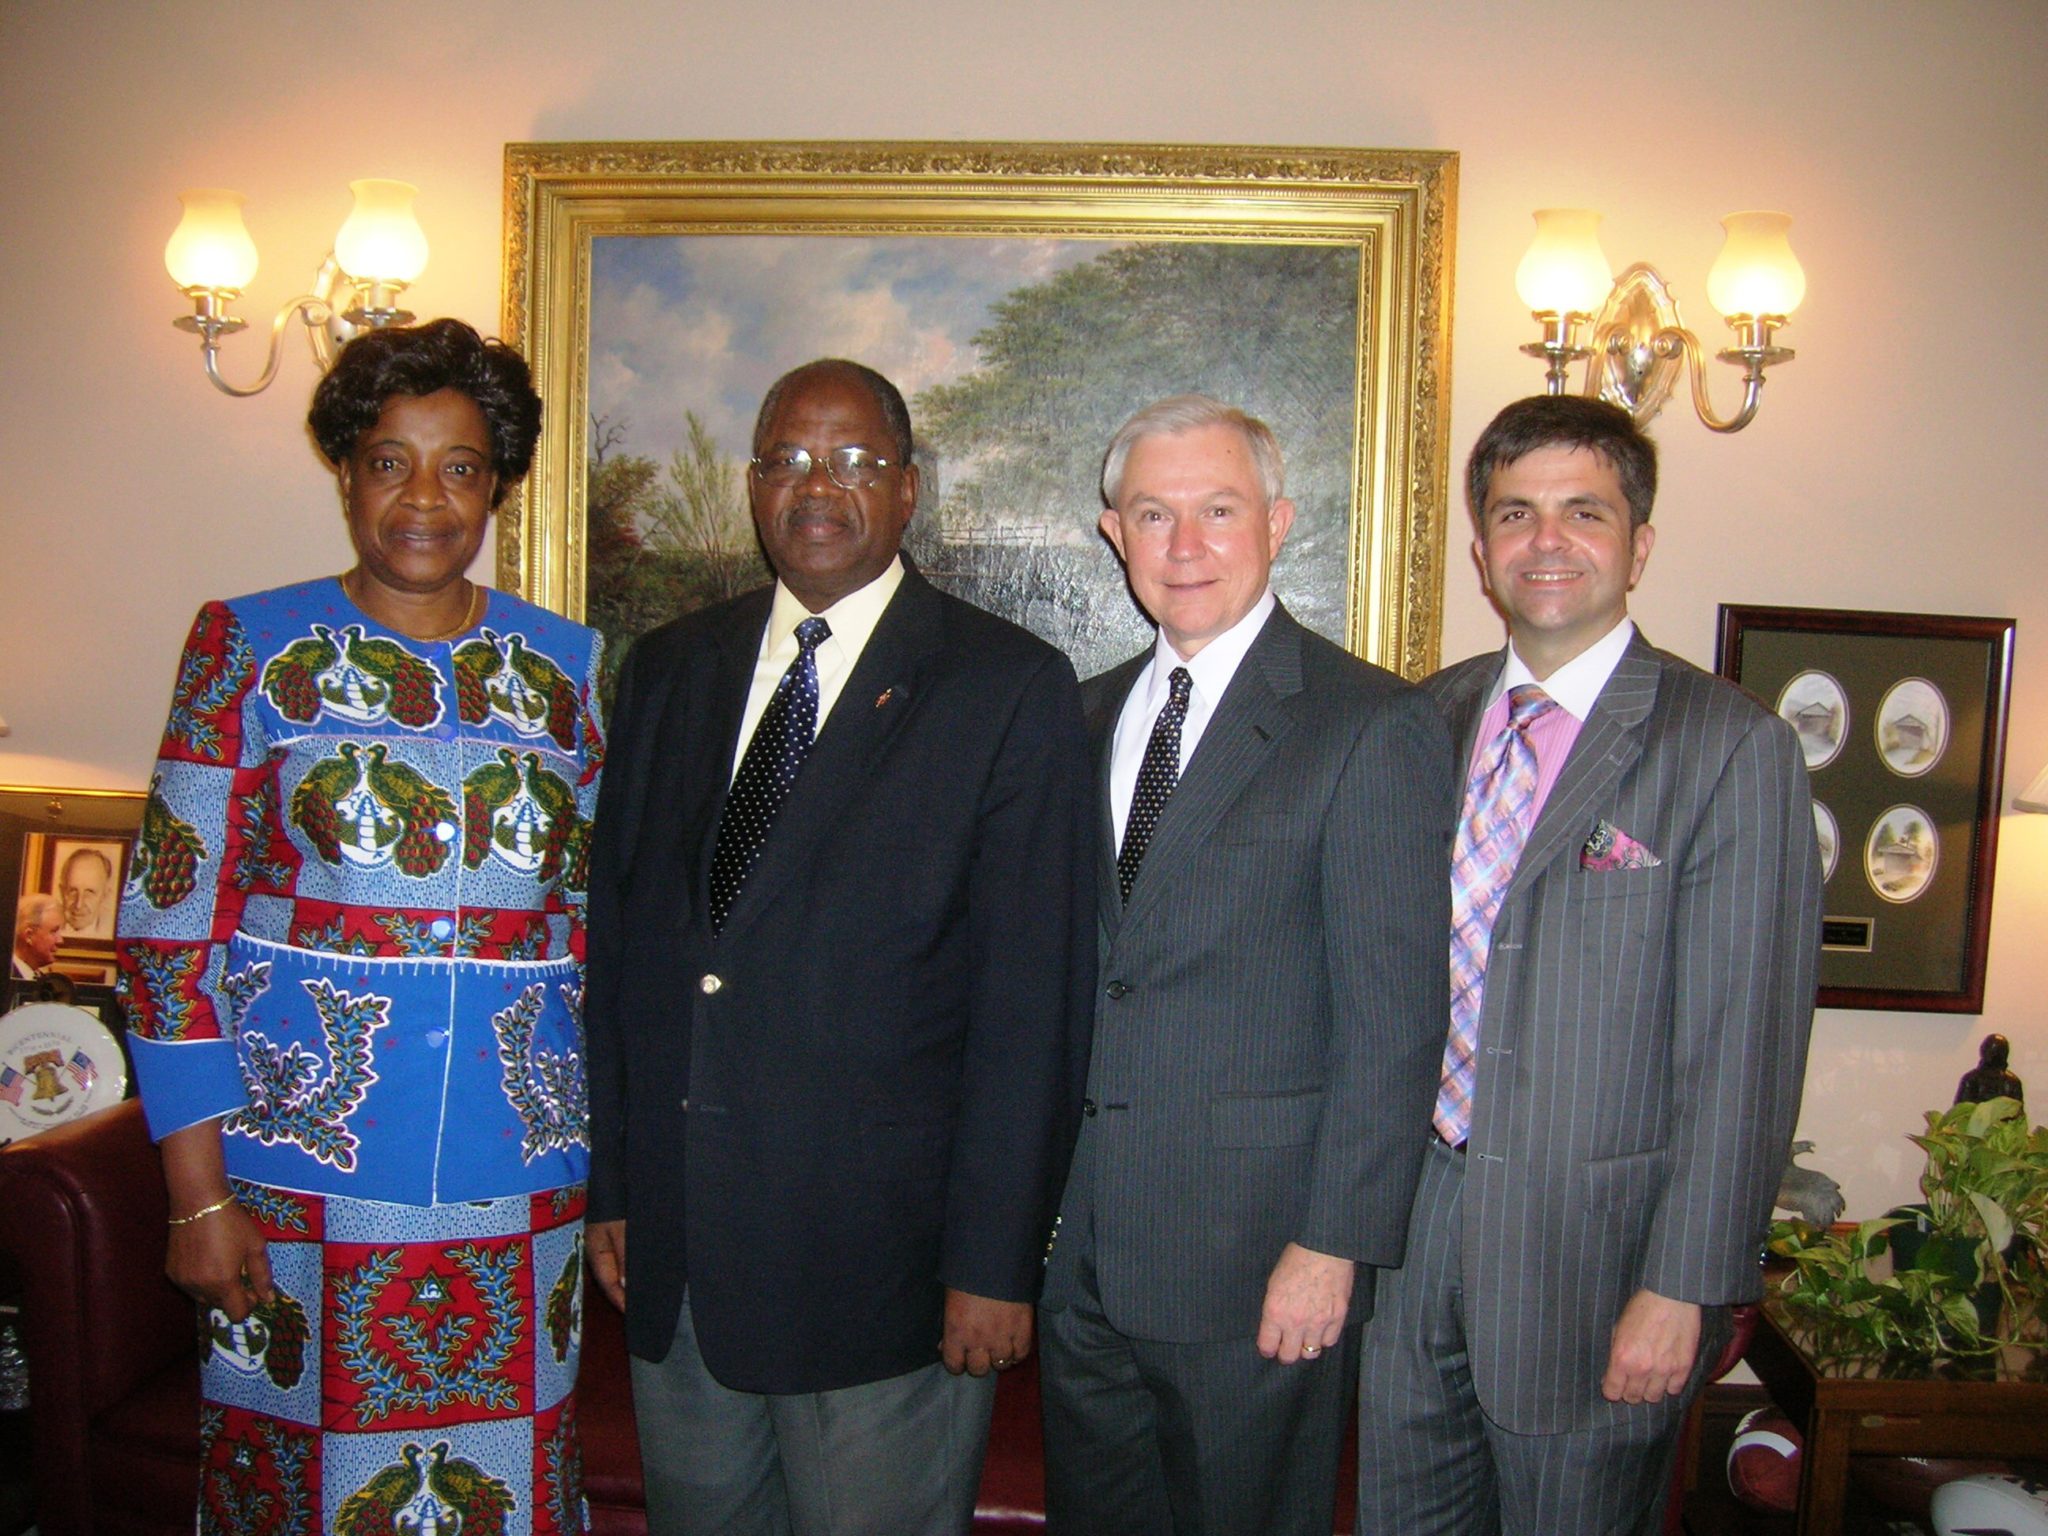 Senator Jeff Sessions meets with a Congolese United Methodist bishop and IRD's Mark Tooley